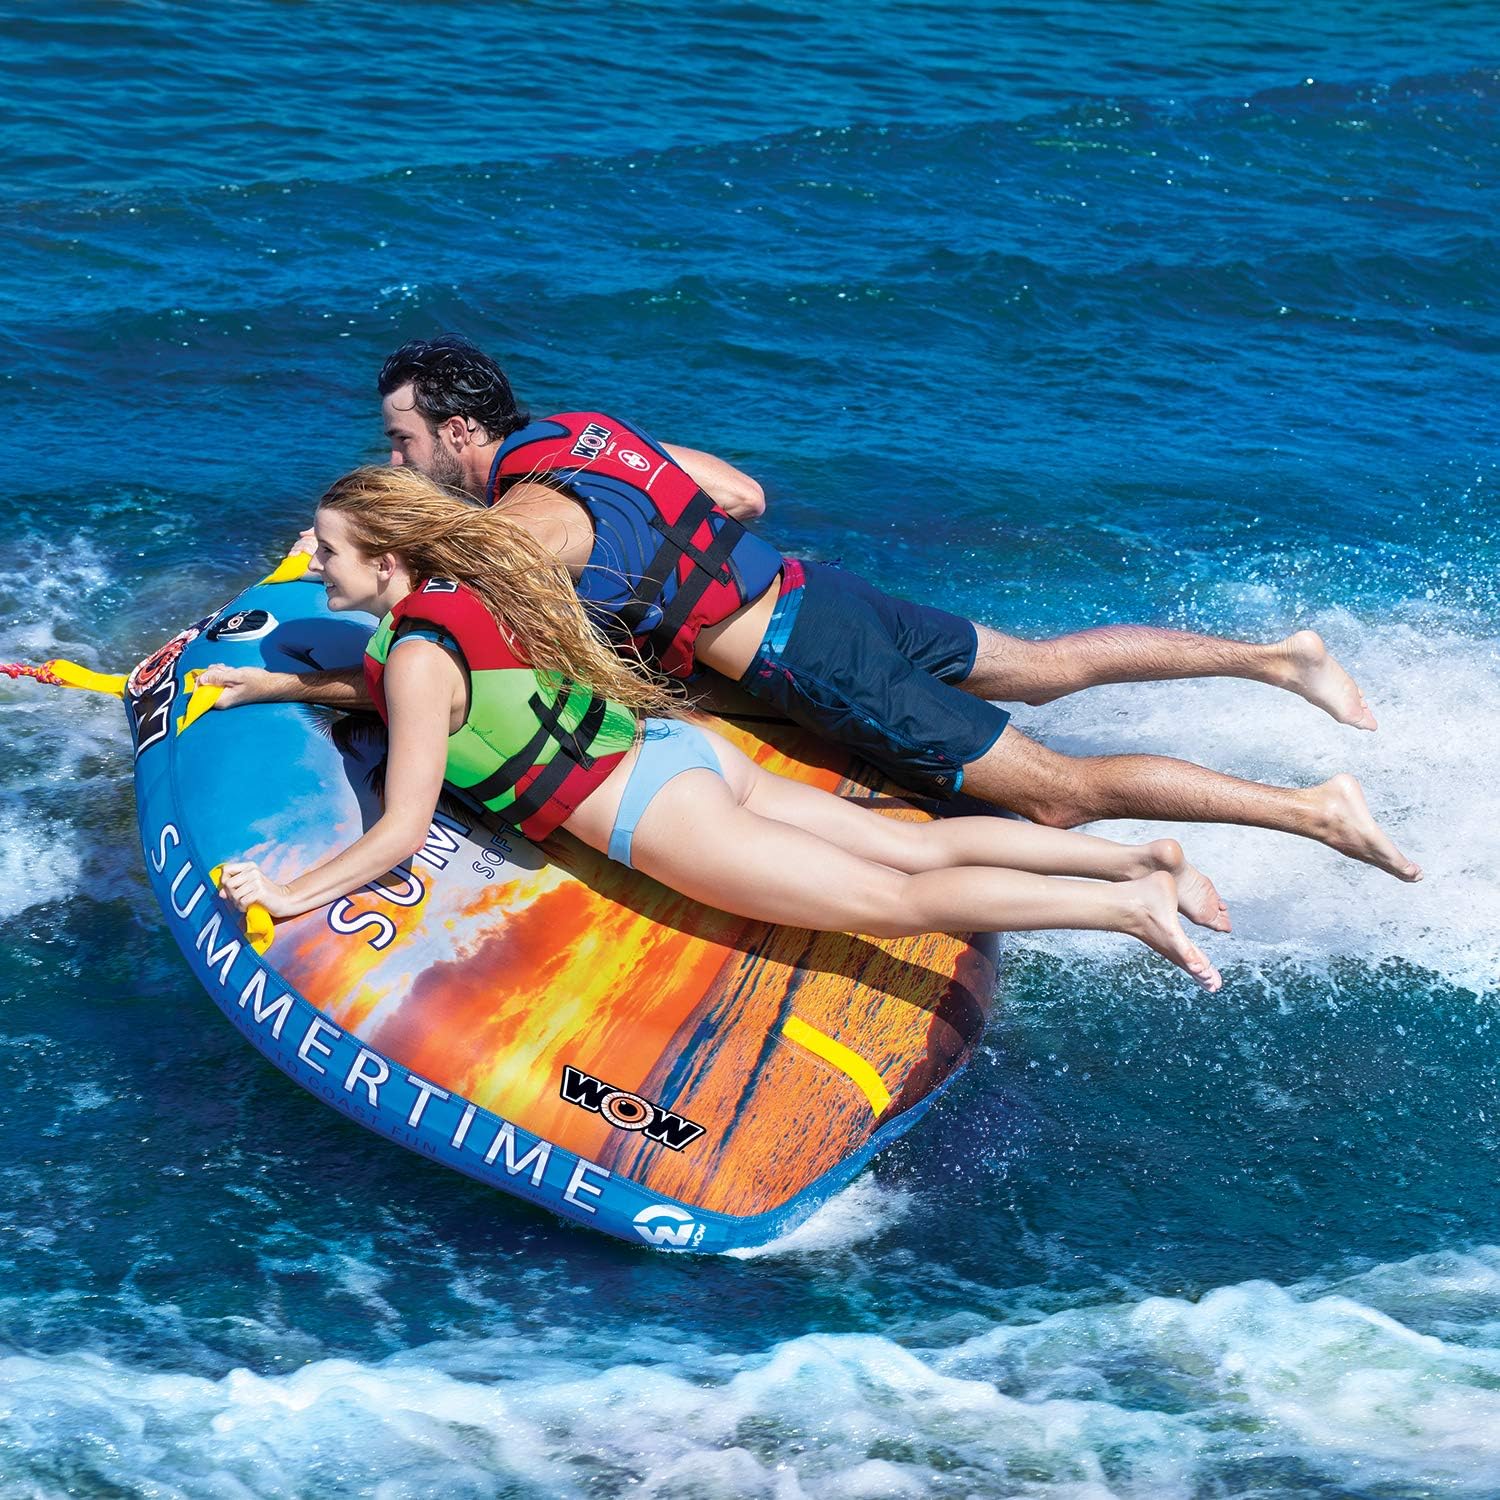 Wow World of Watersports Born to Ride Inflatable Towable Deck Tube